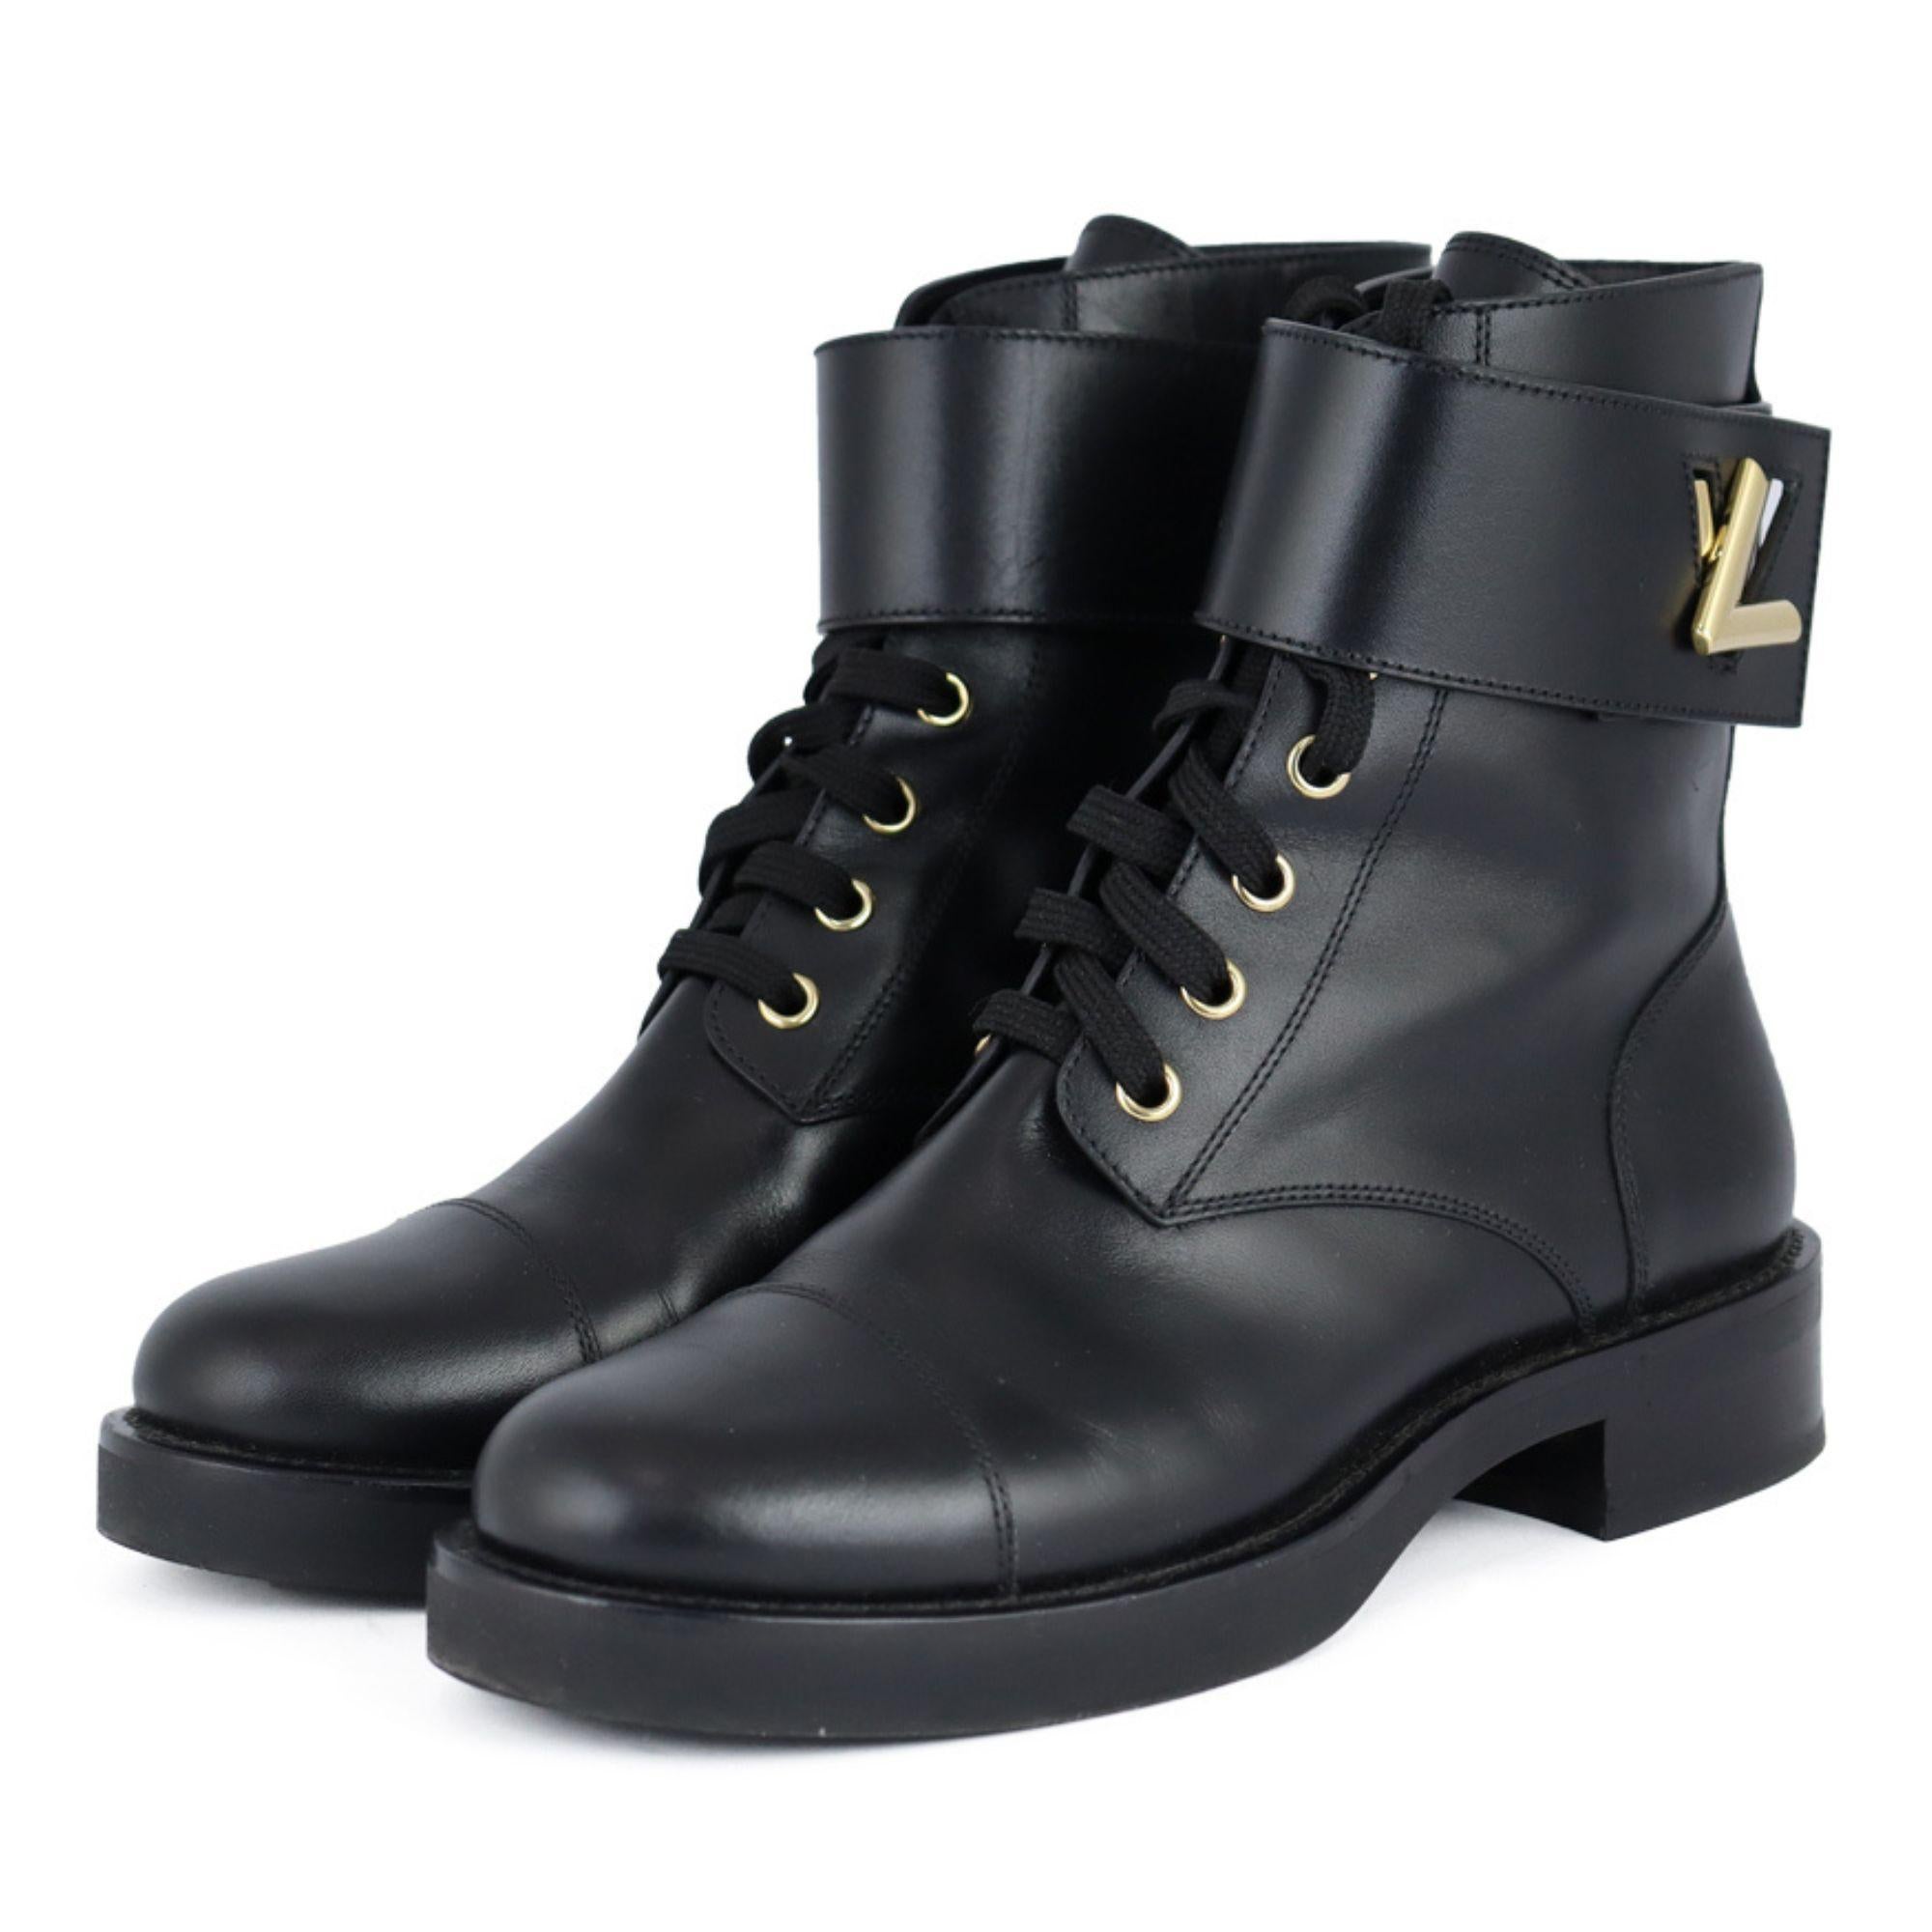 Louis Vuitton black leather wonderland ranger boots.

Material: leather

EU 36.5
Condition

Overall Condition: Like New

Interior Condition: Like New

Exterior Condition: Like New

Extras
Includes original box and two dust bags